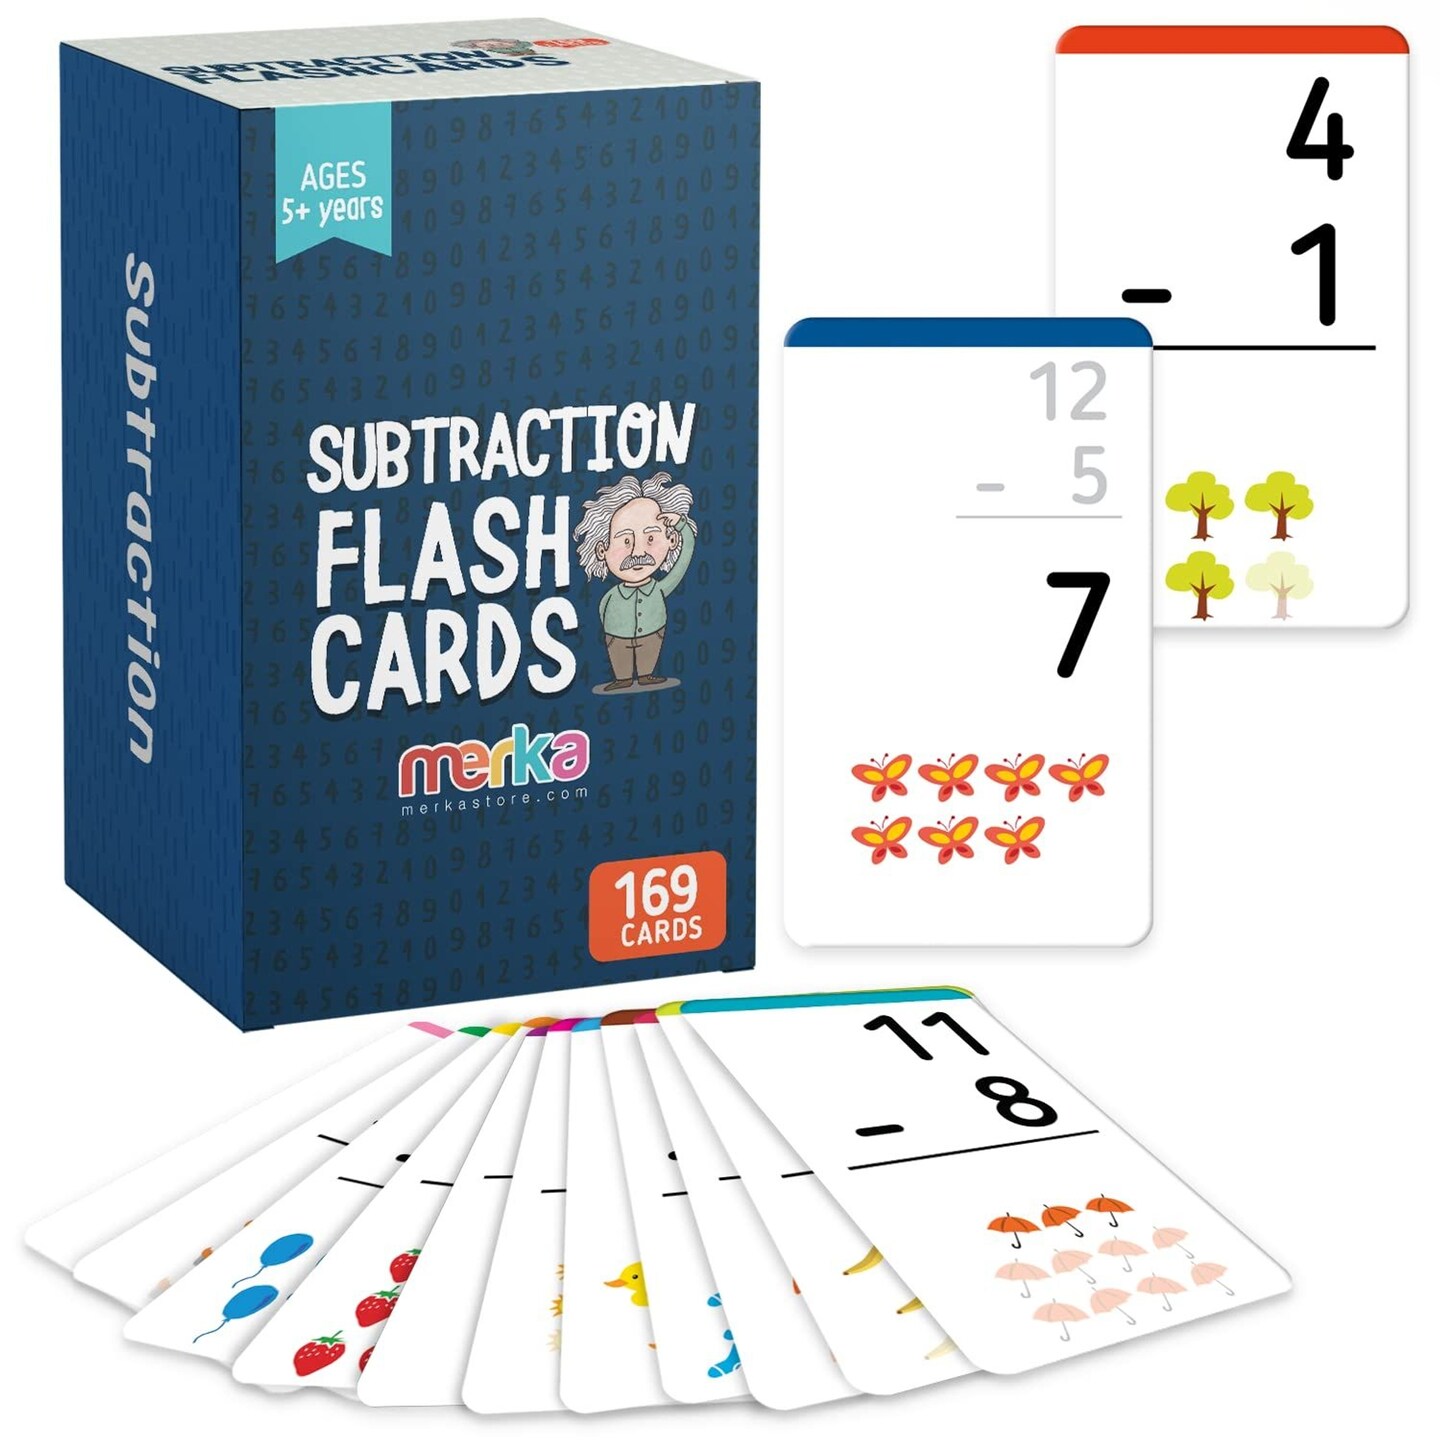 merka Home Schooling Materials Subtraction Flash Cards Preschool Math Workbook Touch Math Set of 169 Cards Learning Resources Math Flashcards For Kids